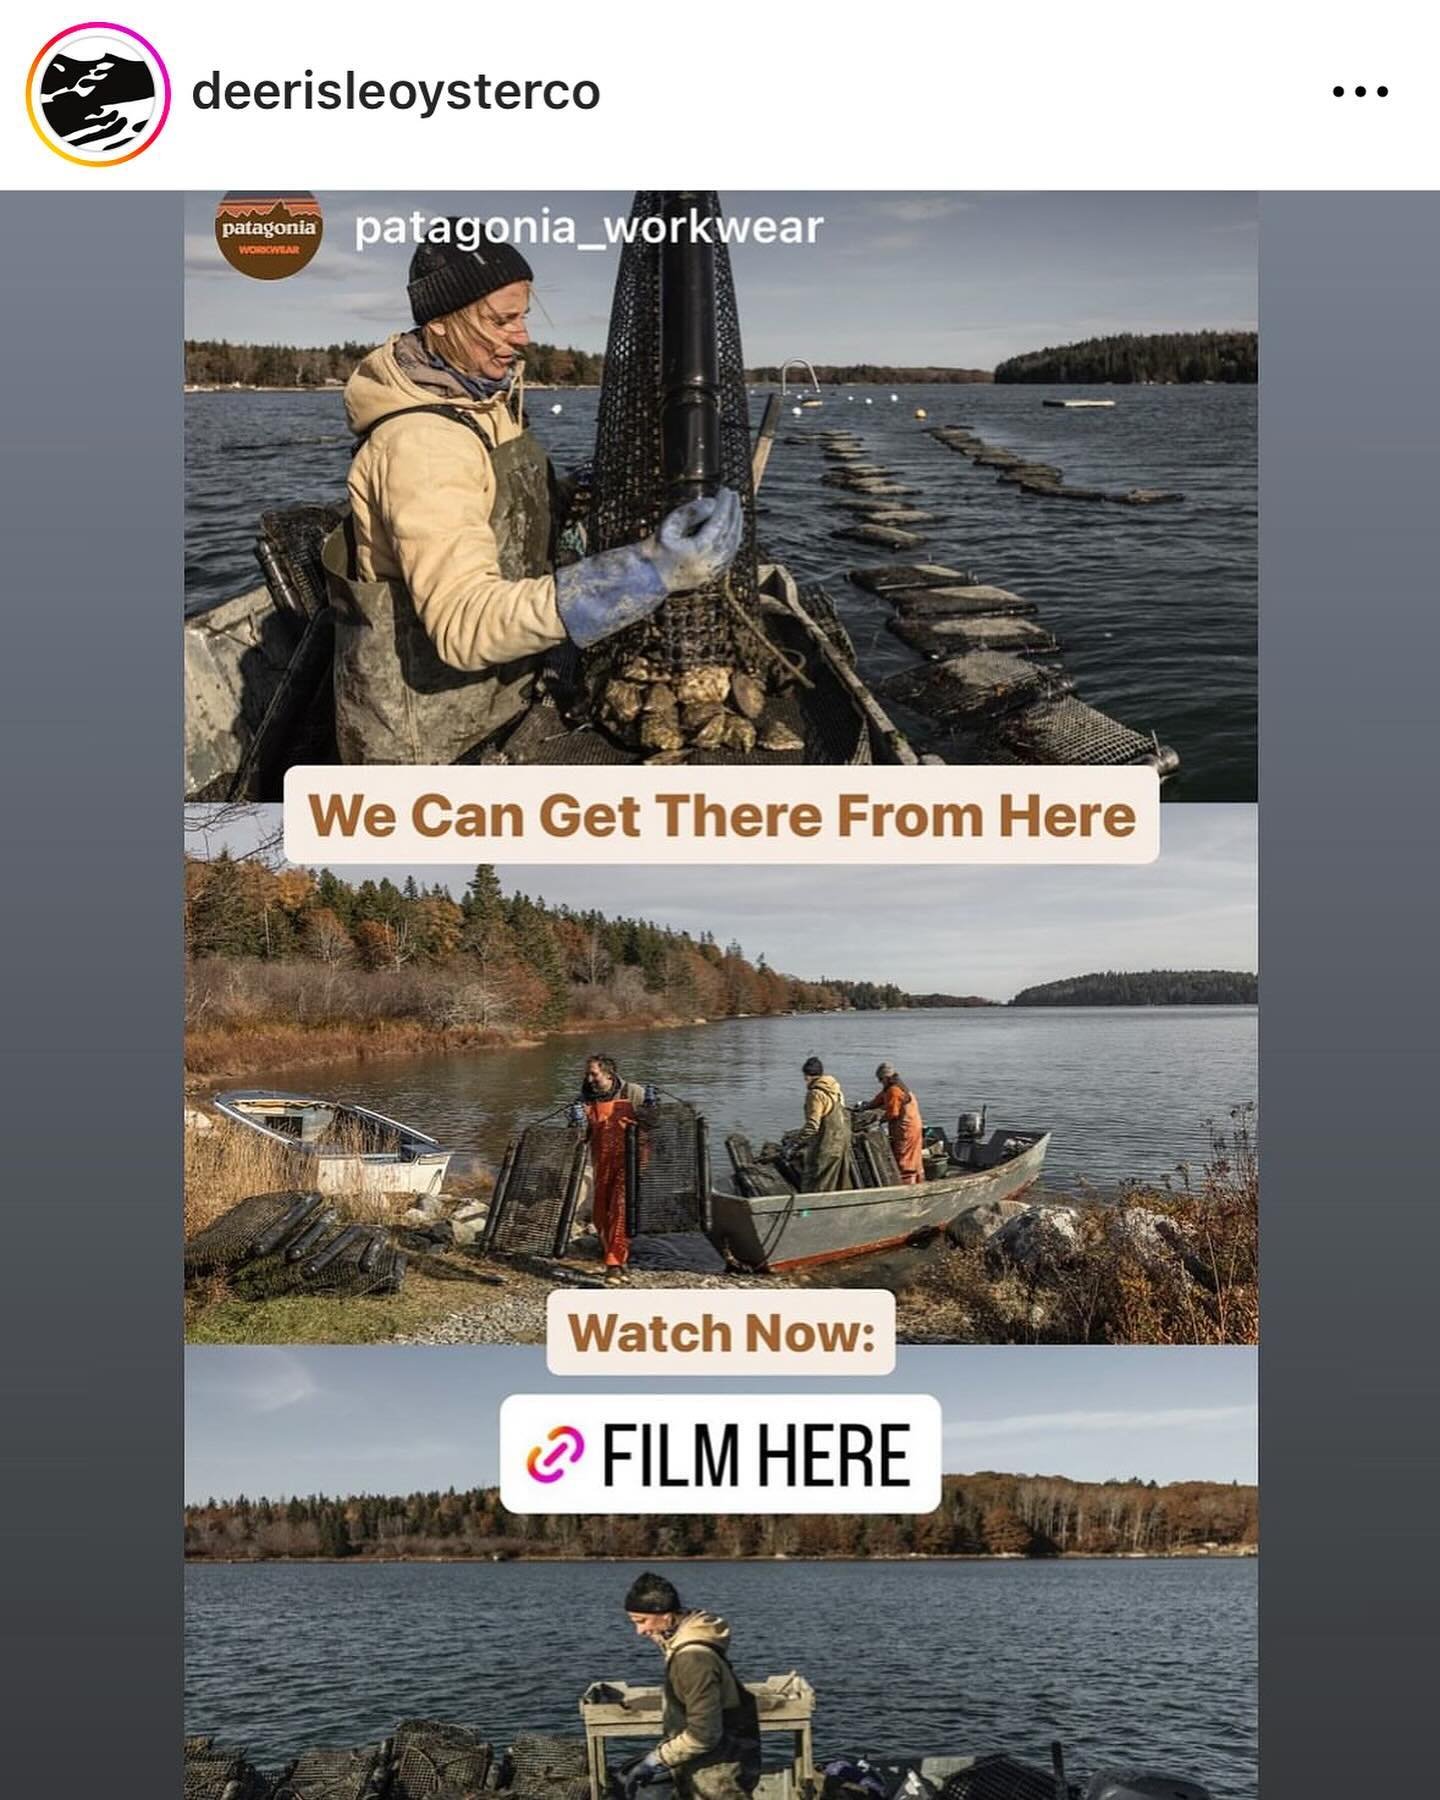 We&rsquo;re so excited to see fellow sea farmer Abby Barrows&rsquo; @deerisleoysterco featured as part of @patagonia &lsquo;s latest film WE CAN GET THERE FROM HERE. Take note of those @mycobuoys , we&rsquo;ve been experimenting with them as an earth